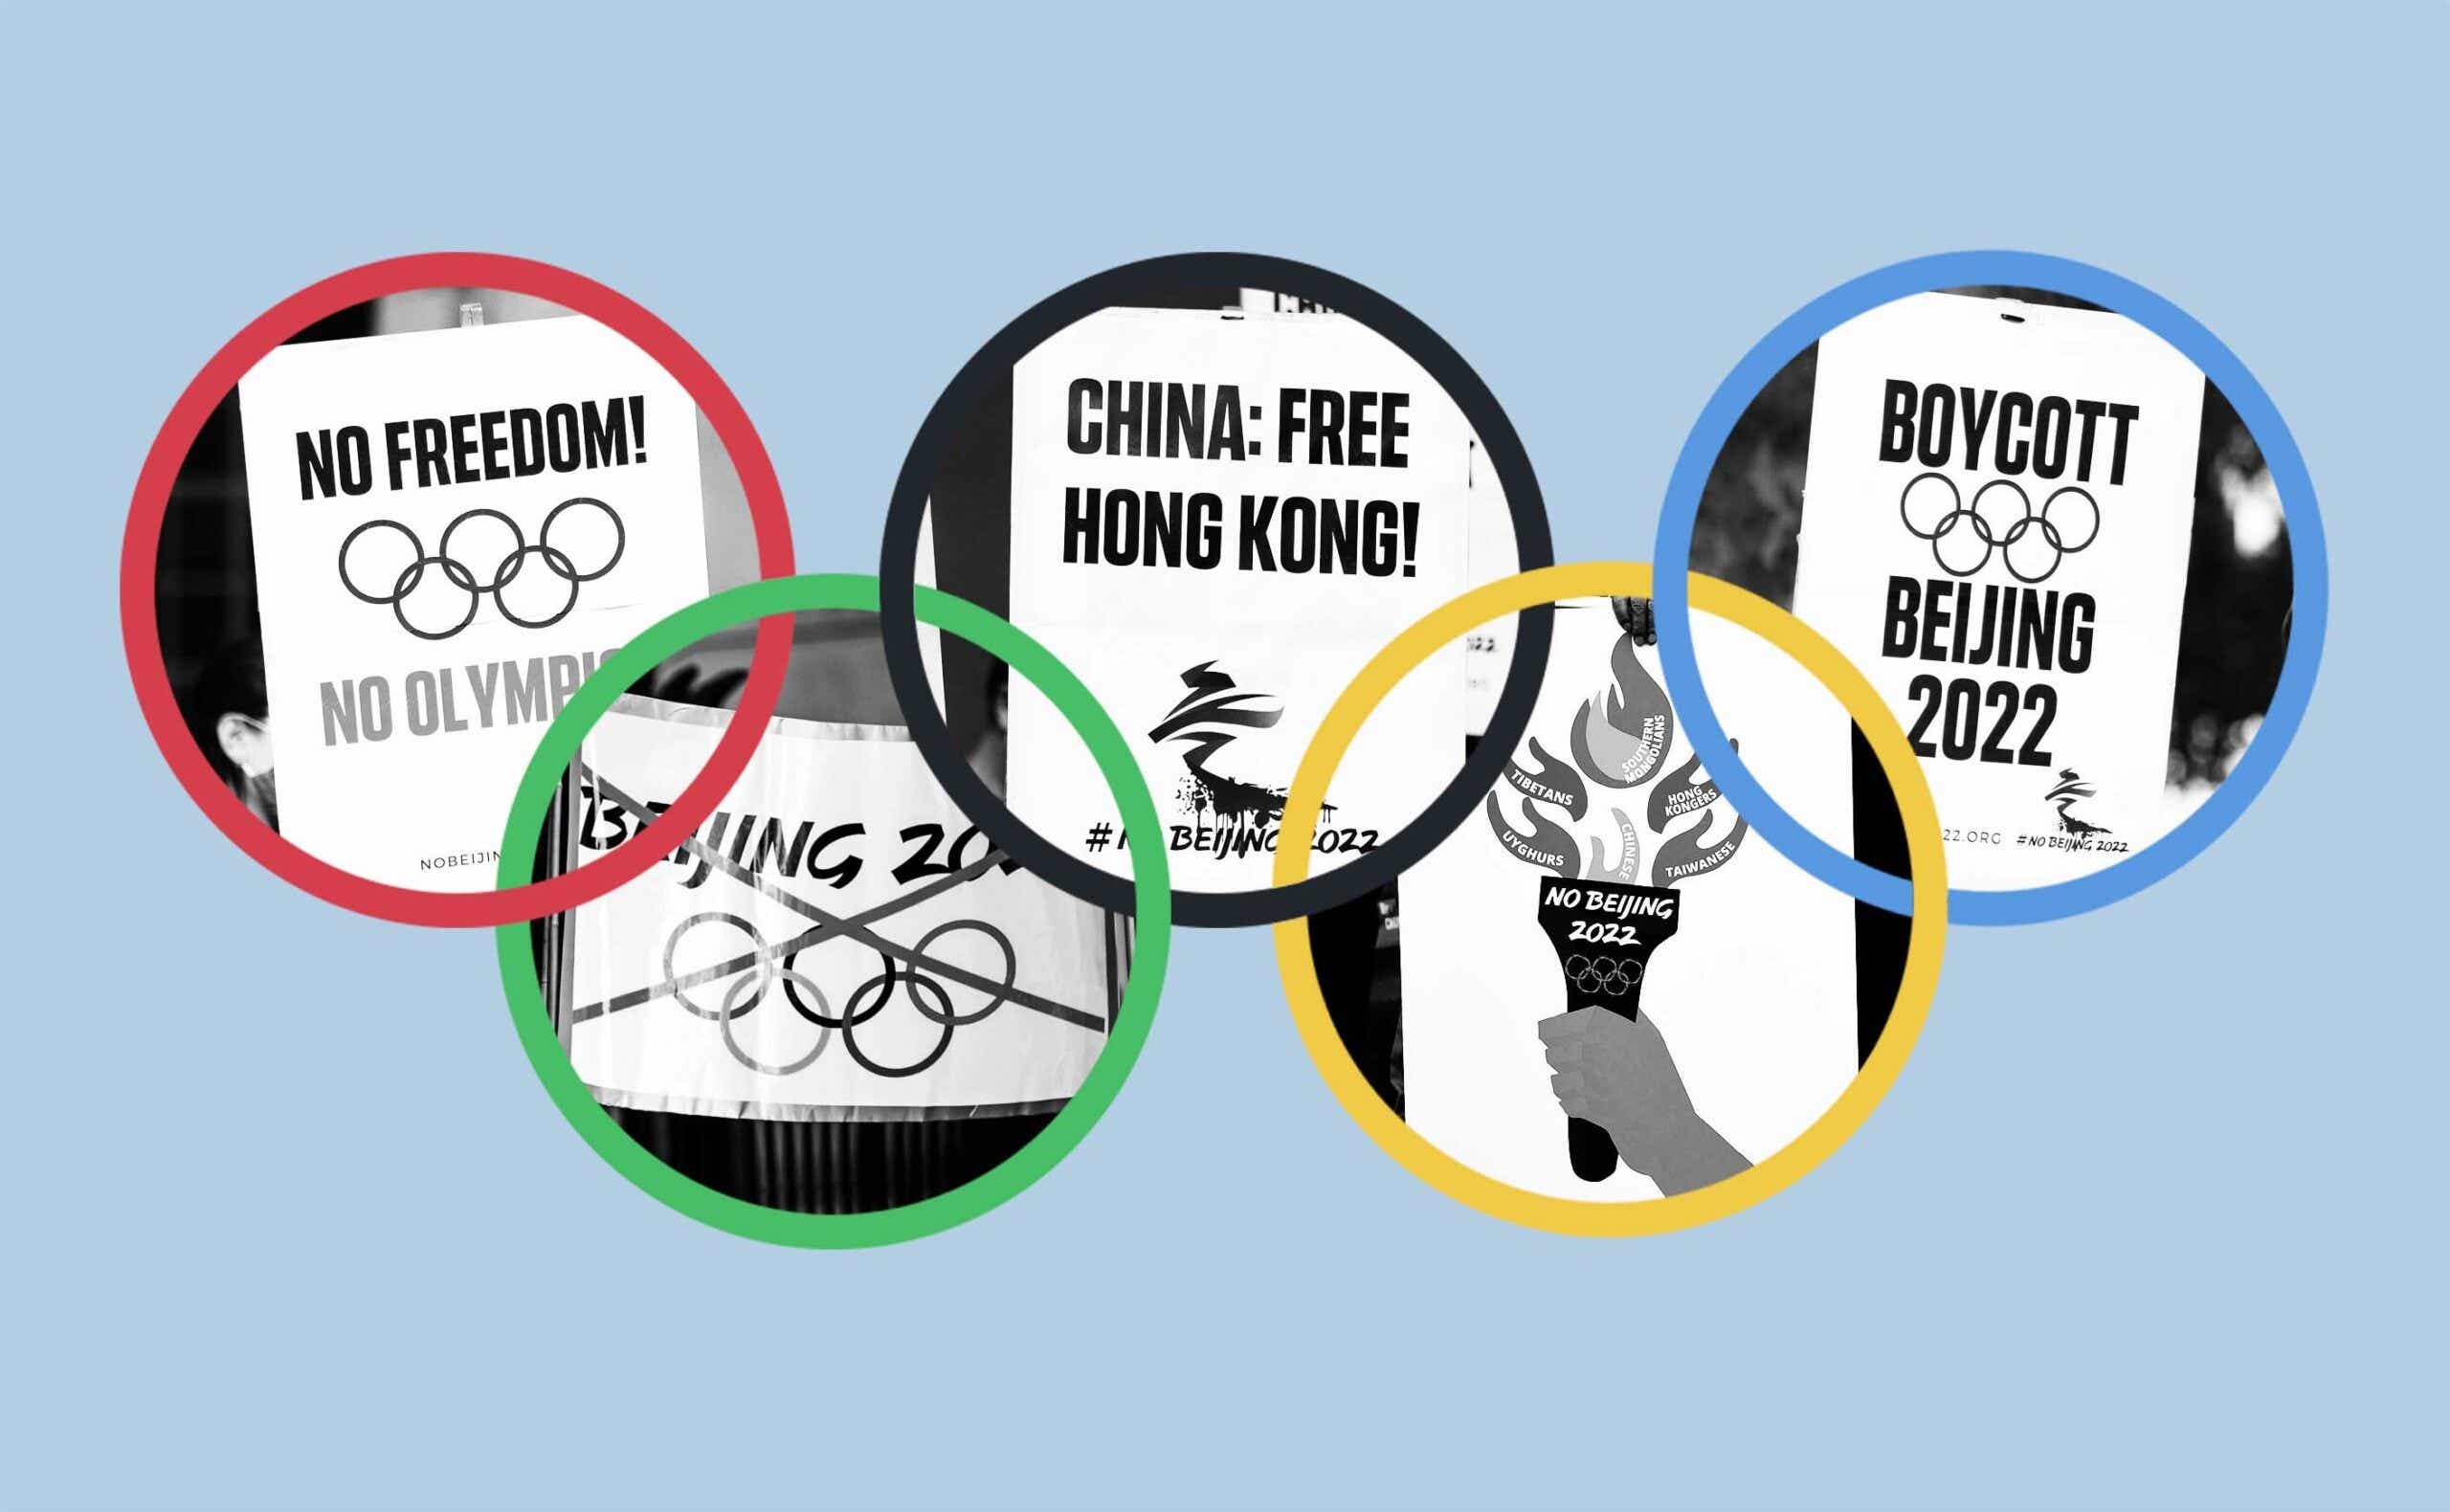 The Olympic rings with photos of protest signs